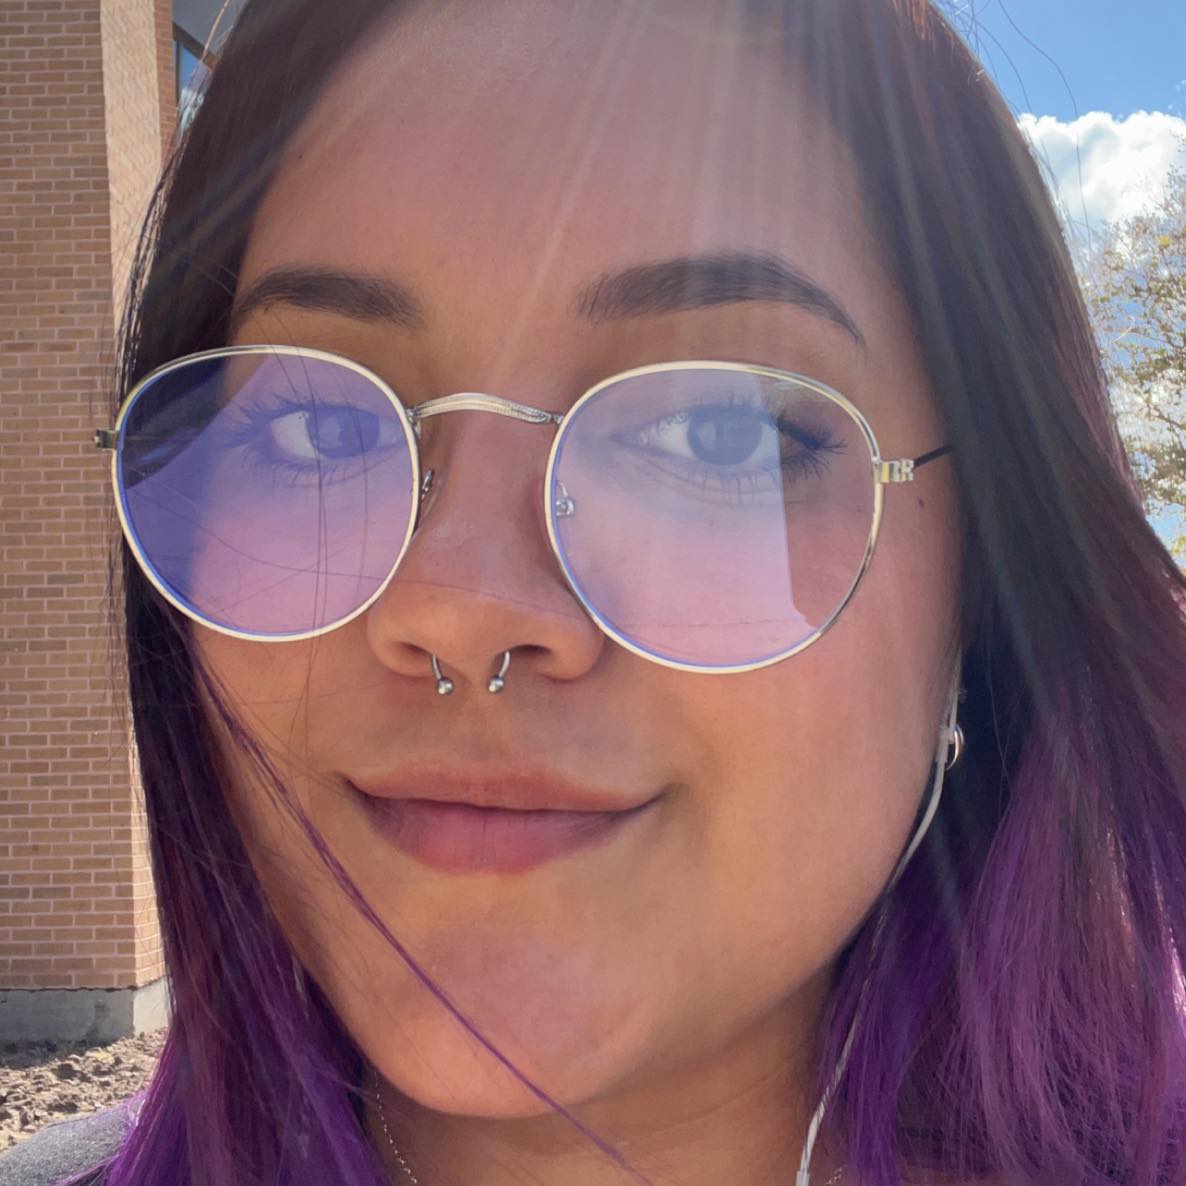 Person with brown and purple hair and glasses with septum piercing.